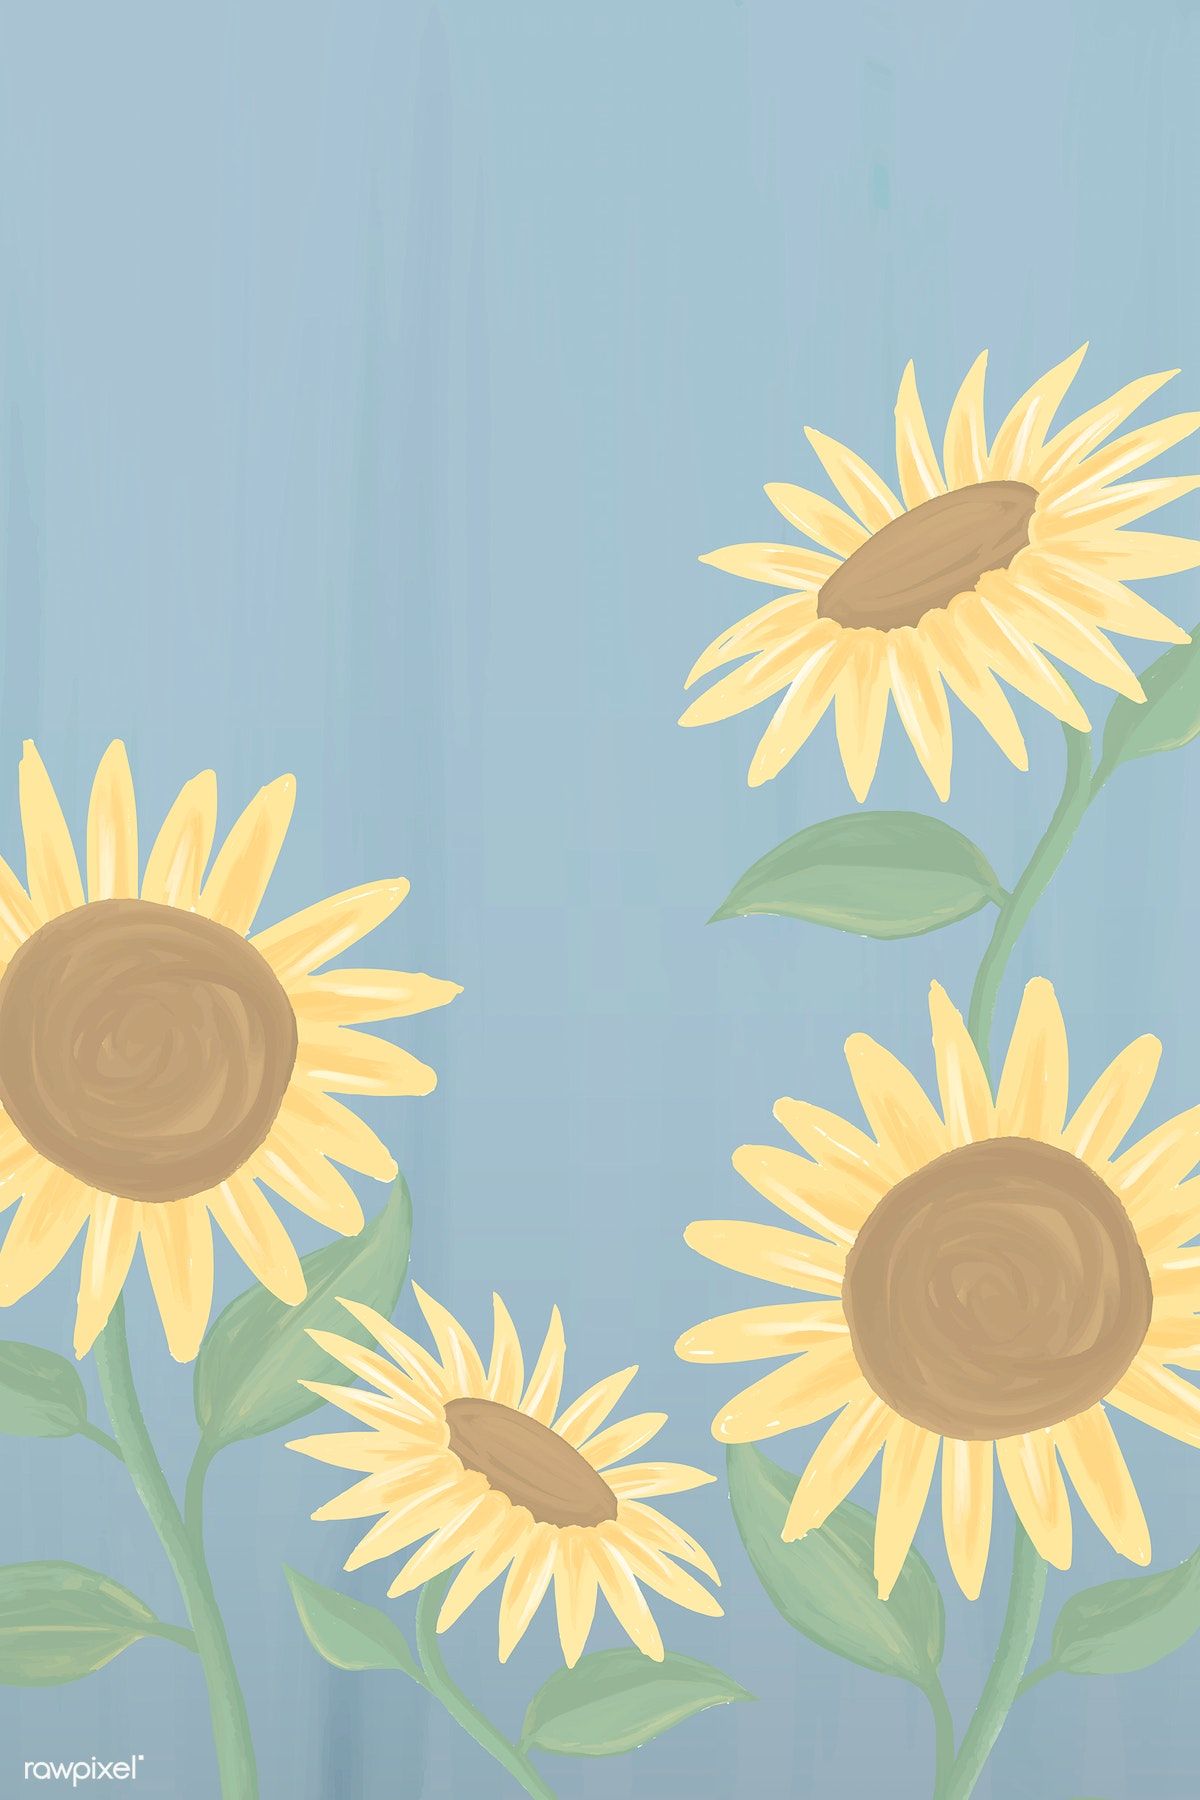 Download premium vector of Hand drawn sunflower mockup vector by Tang about sunflower, hand drawn sunflower, wallpaper sunflower, sunflower illustration, and invite card 1229977